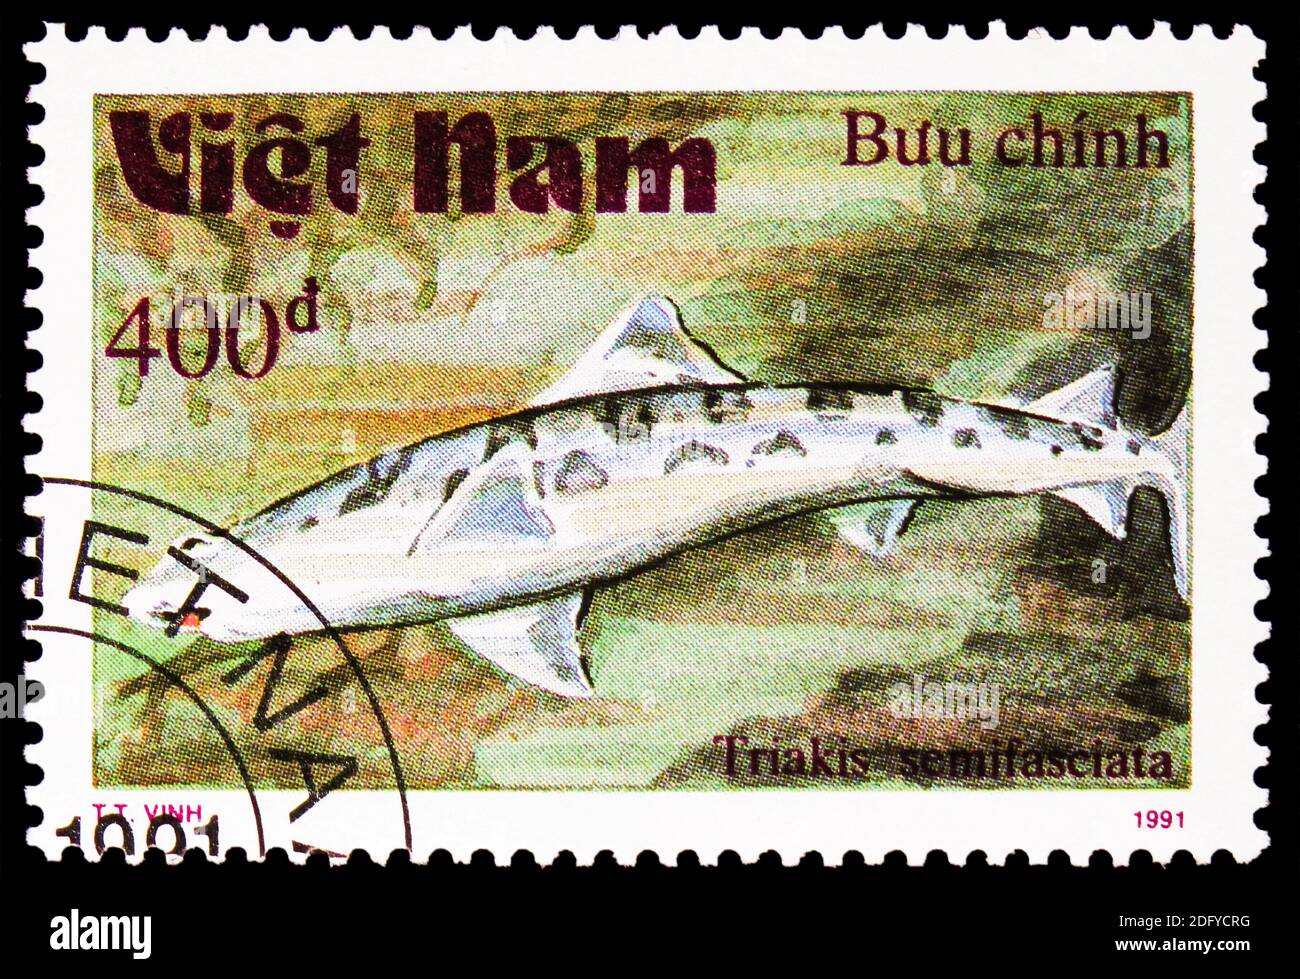 MOSCOW, RUSSIA - AUGUST 28, 2020: Postage stamp printed in Vietnam shows Leopard Shark (Triakis semiofasciata), Sharks serie, circa 1991 Stock Photo